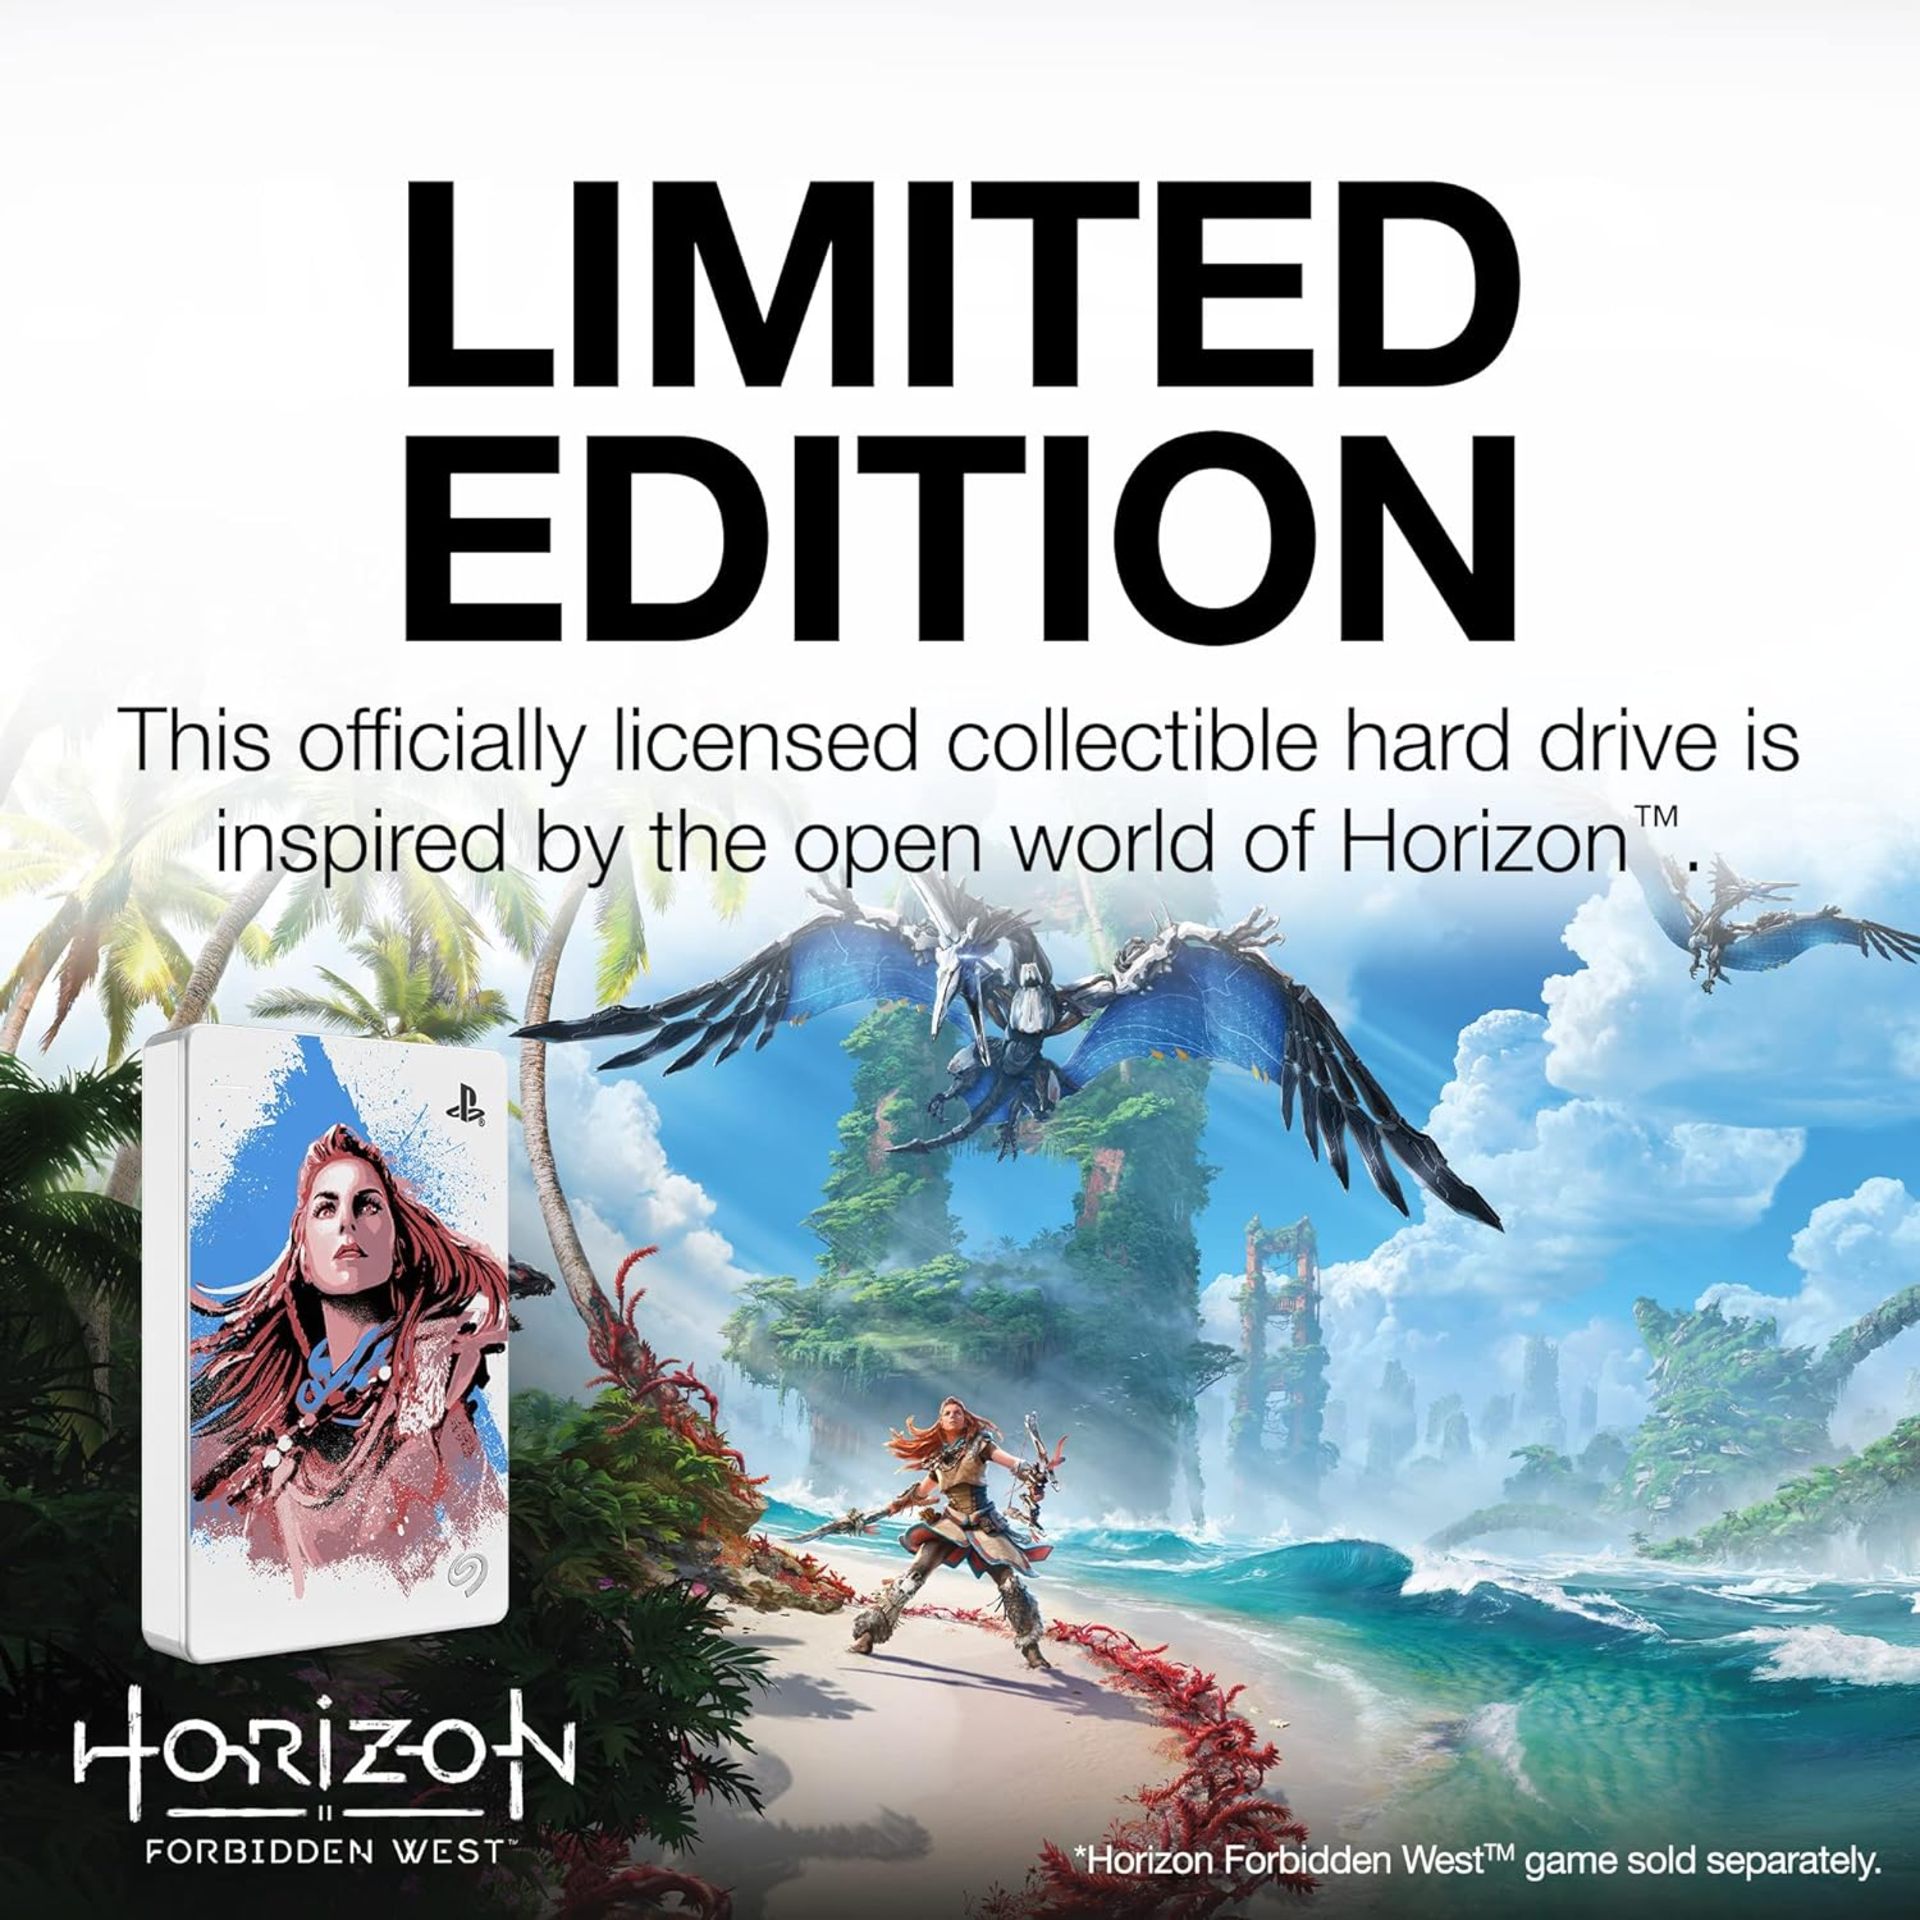 BRAND NEW FACTORY SEALED SEAGATE Horizon Forbidden West Limited Edition Game Drive 5TB. RRP £159.99. - Image 2 of 7